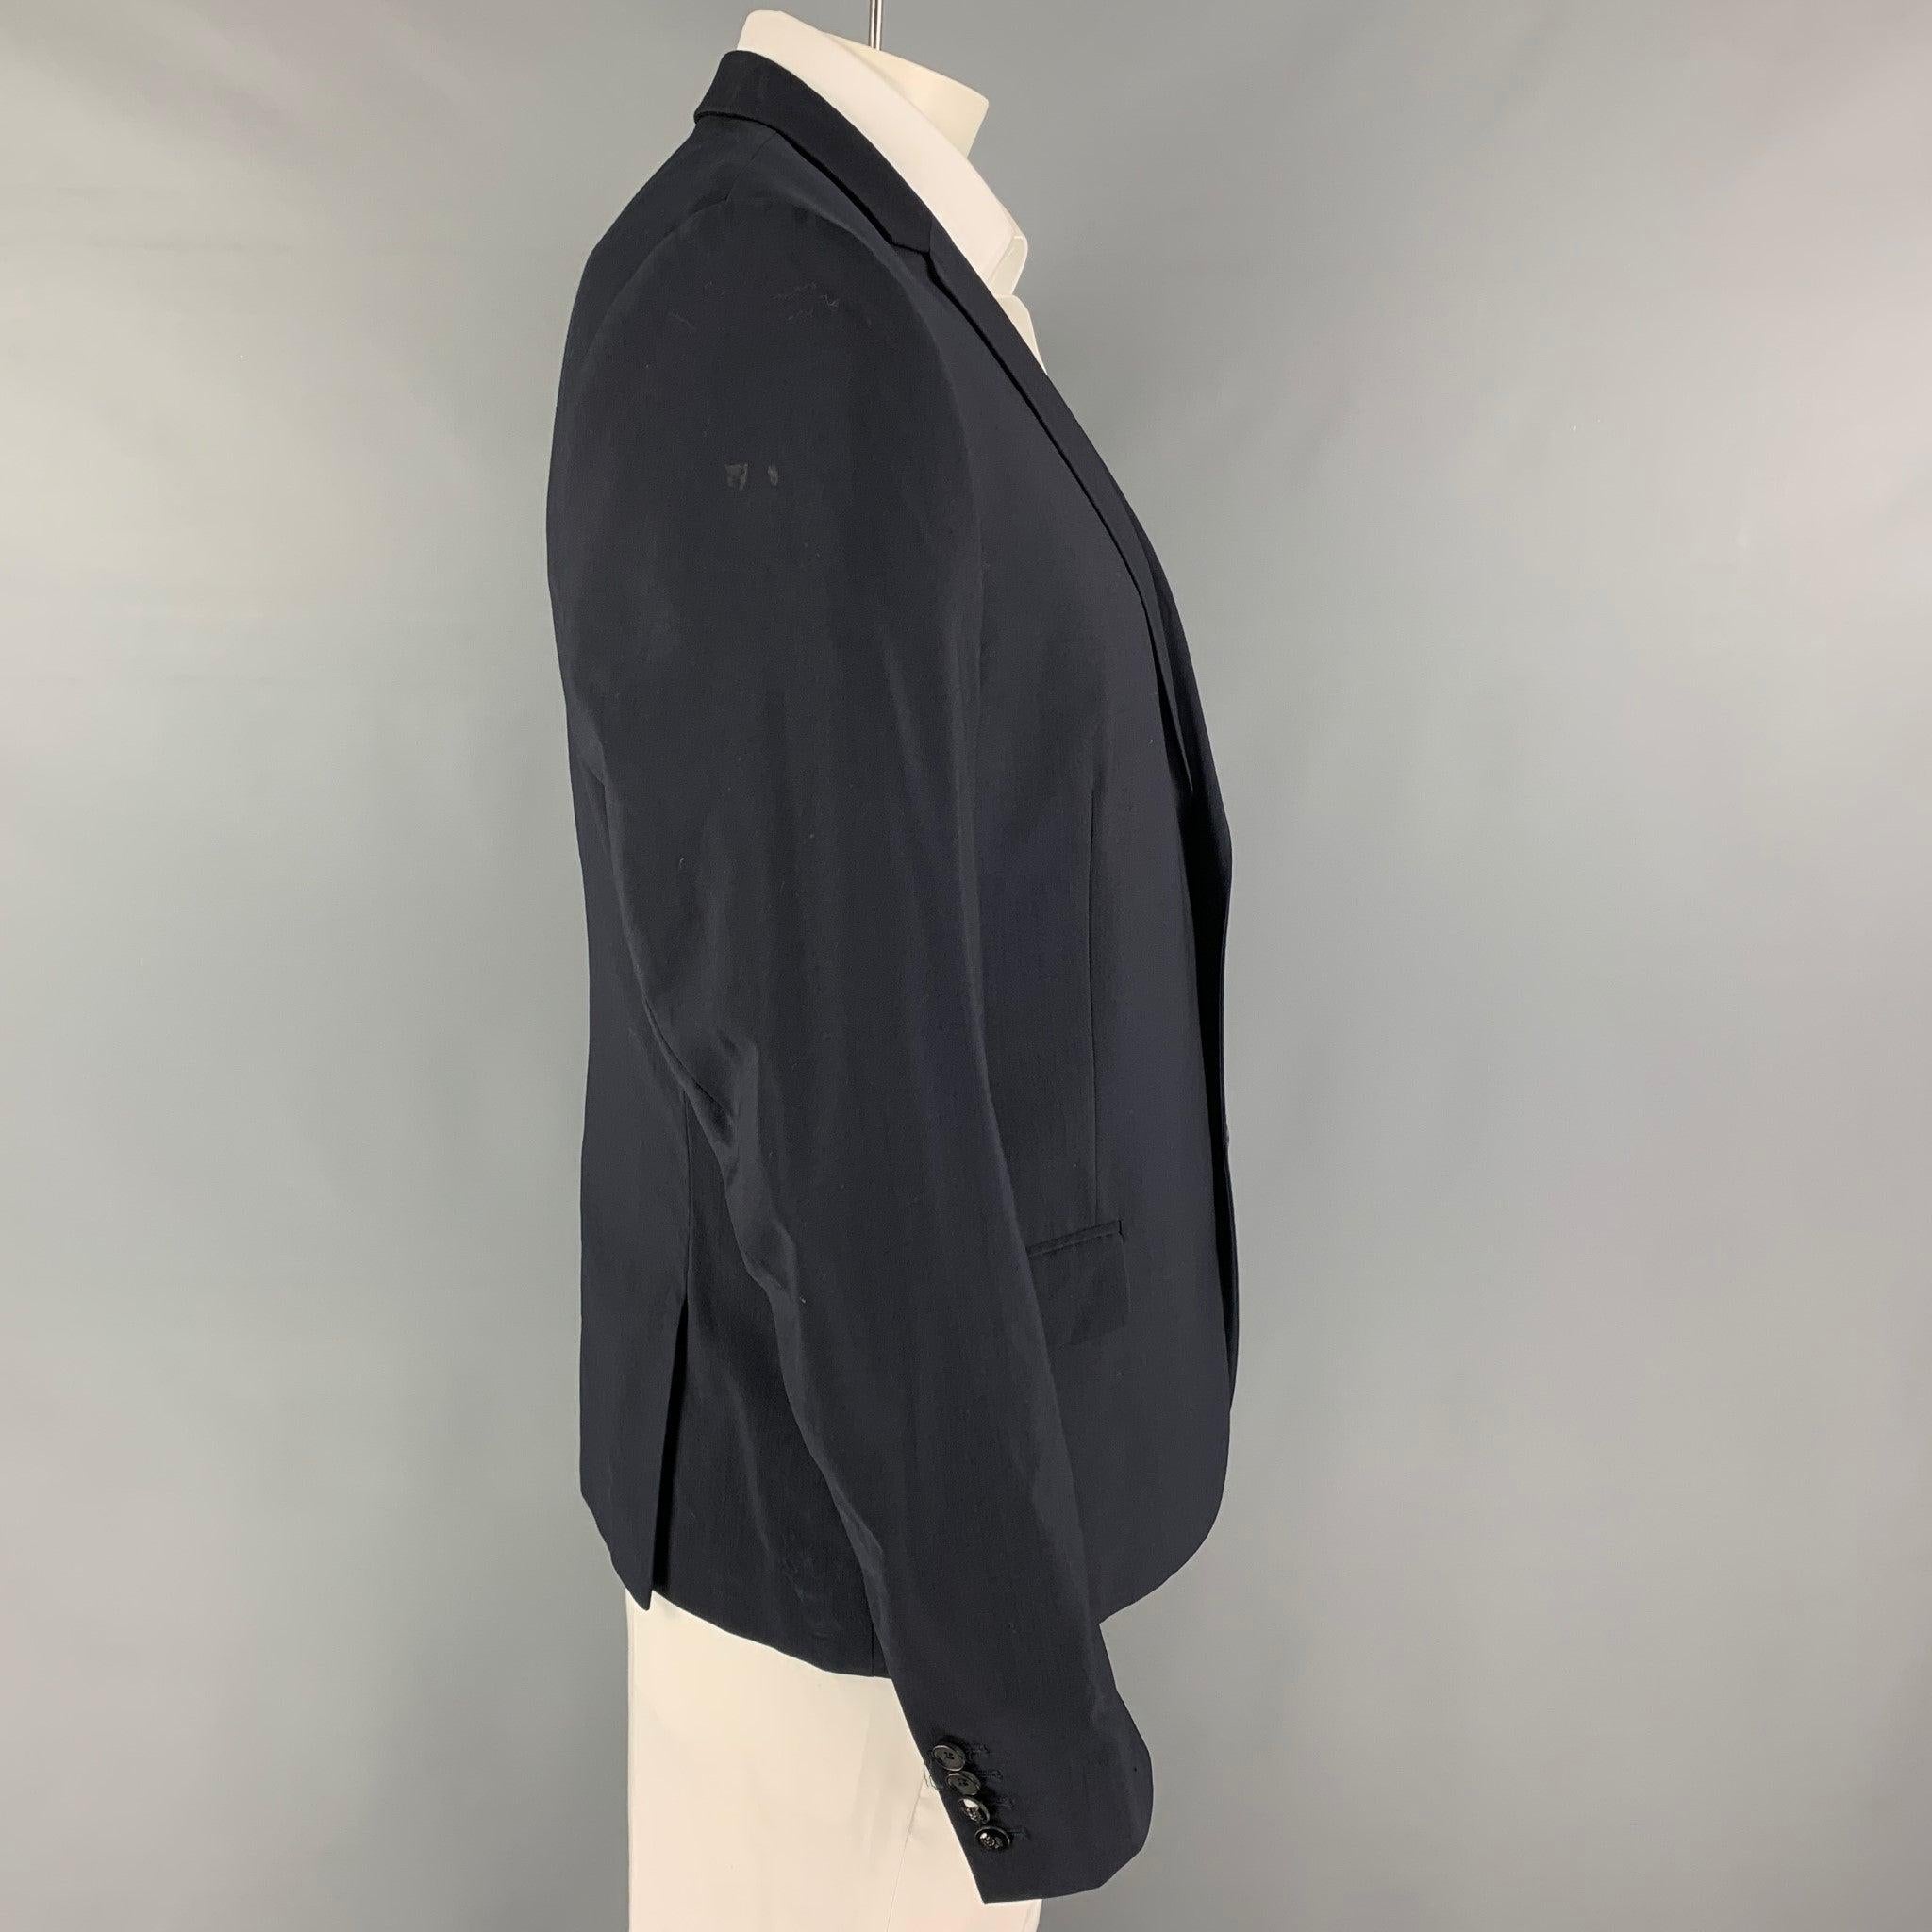 THE KOOPLES
sport coat comes in a navy wool with a full liner featuring a notch lapel, flap pockets, double back vent, and a double button closure. Excellent
Pre-Owned Condition. 

Marked:   54 

Measurements: 
 
Shoulder: 18.5 inches Chest: 44